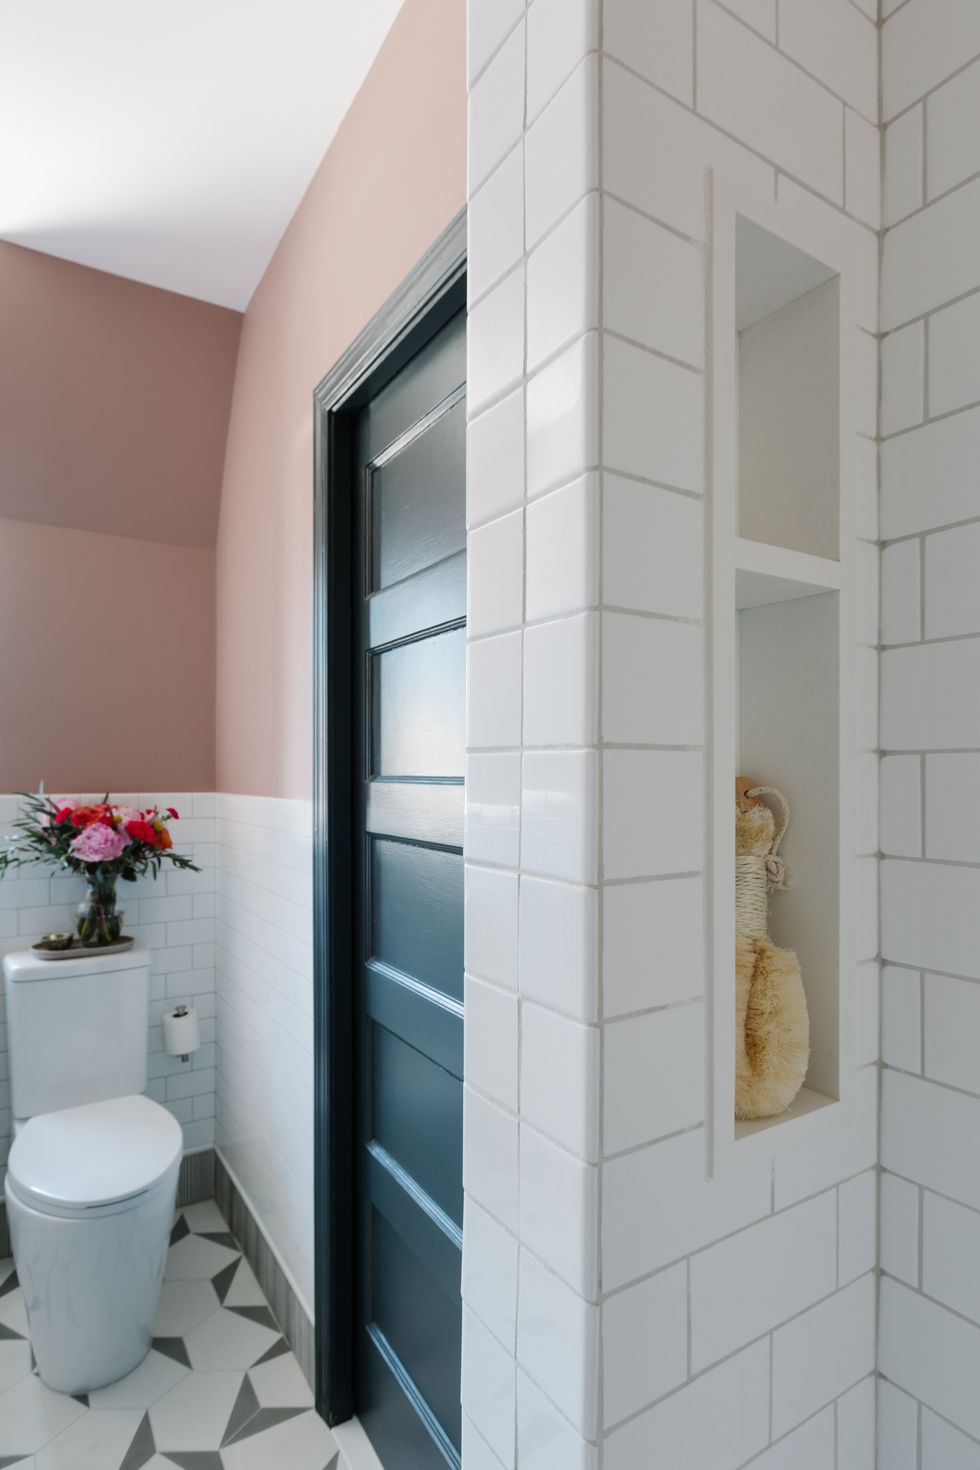 pink painted wall, white subway tile, white toilet, geometric white and gray tiles, built in shelving